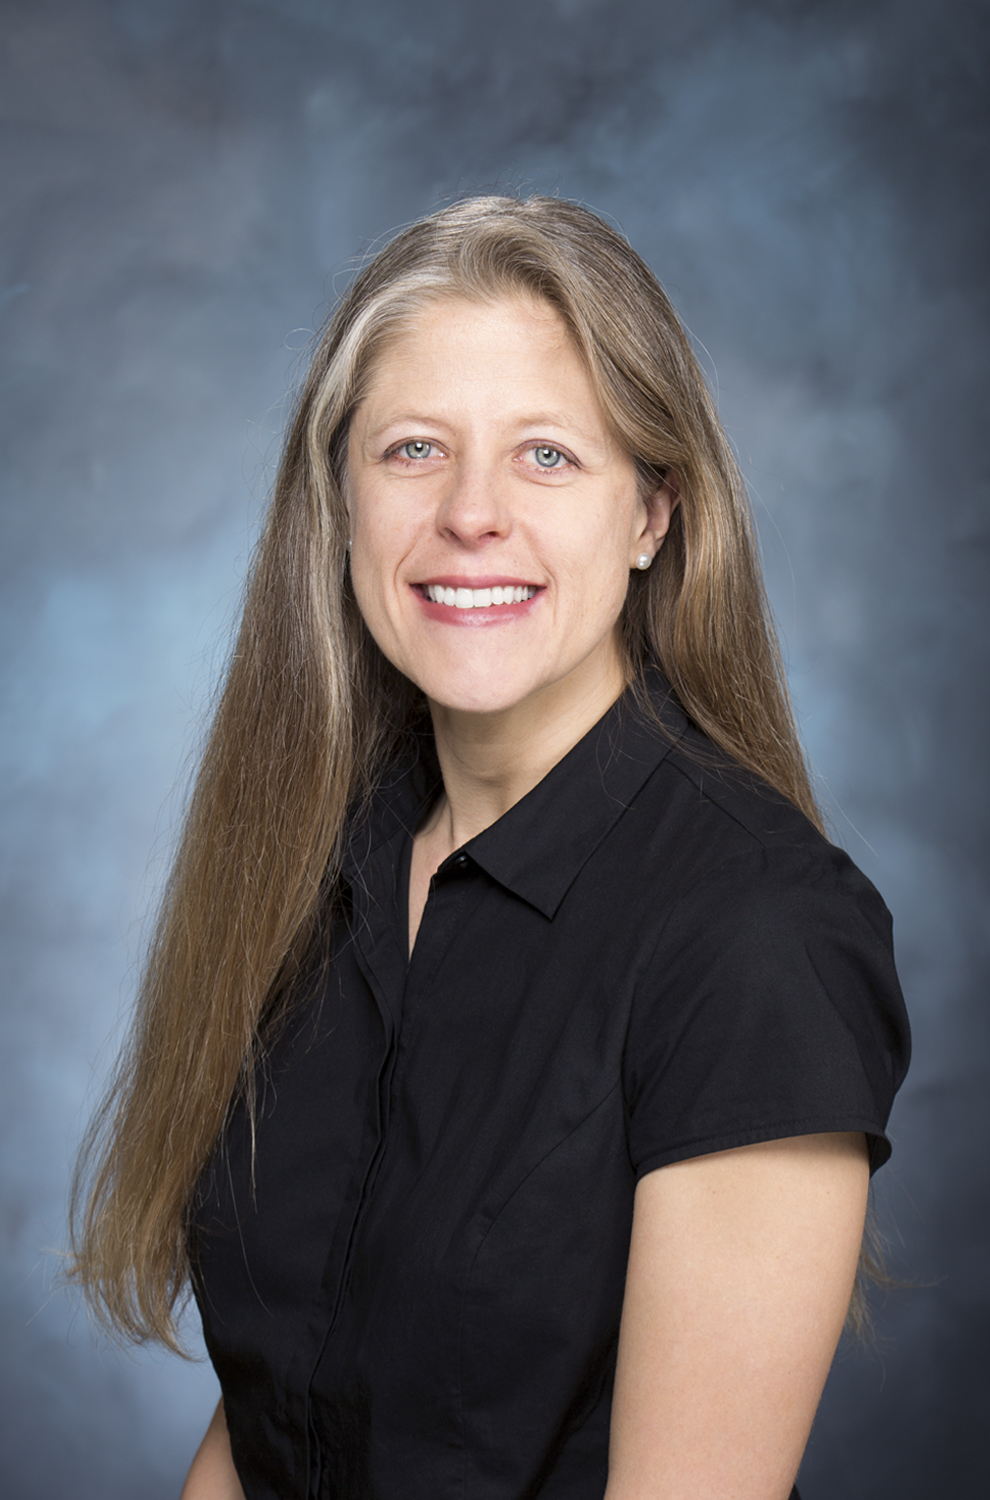 Dr. Heather Whitley of LLNL Talks With U.S. WIN About Fusion Ignition